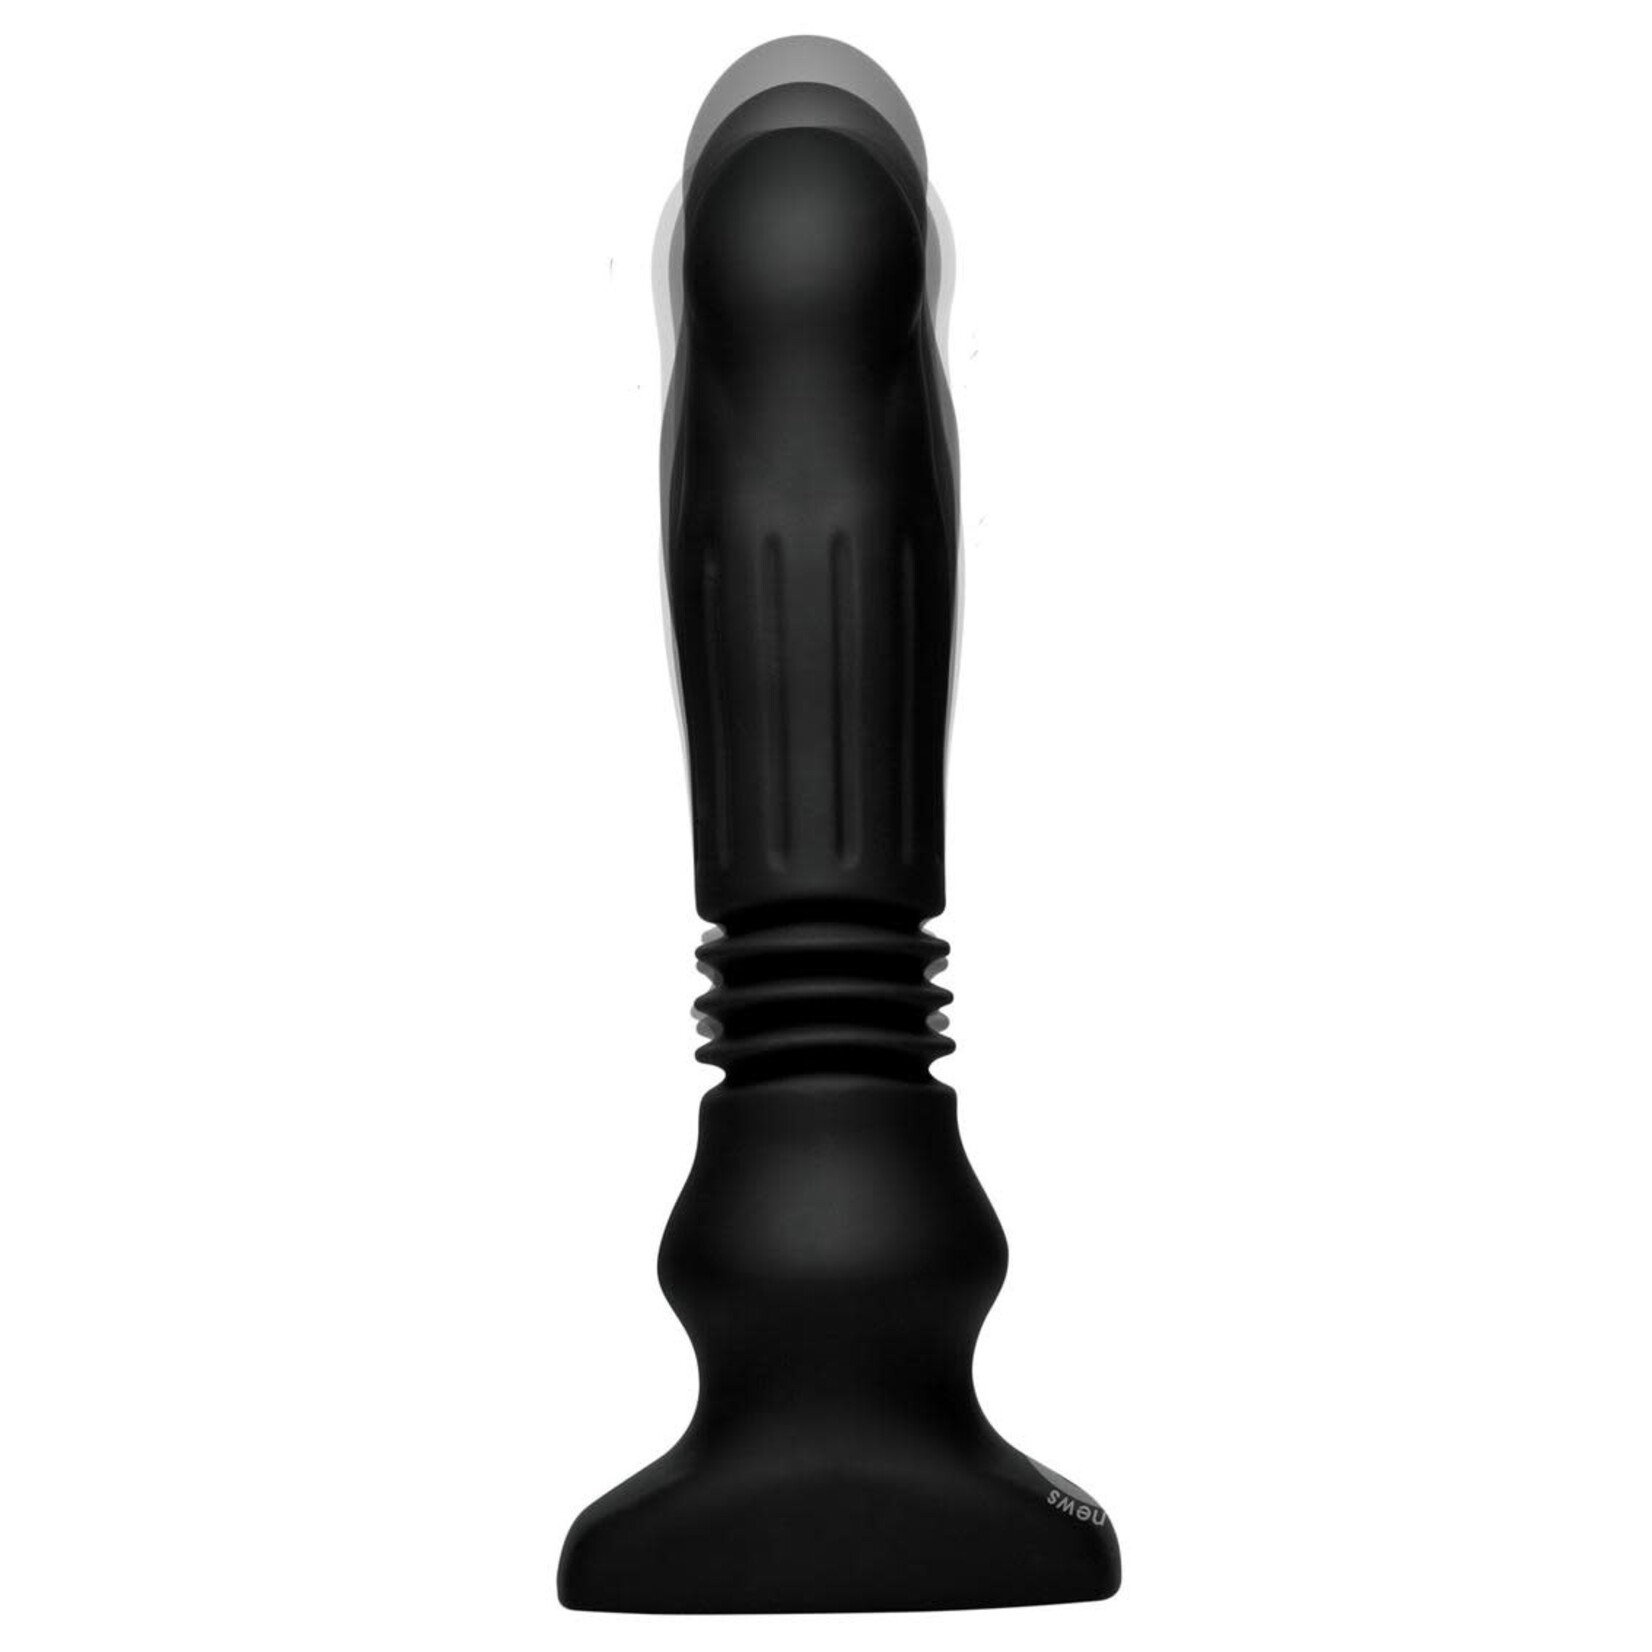 Thunder Plugs Silicone Swelling & Thrusting Plug with Remote Control - Black